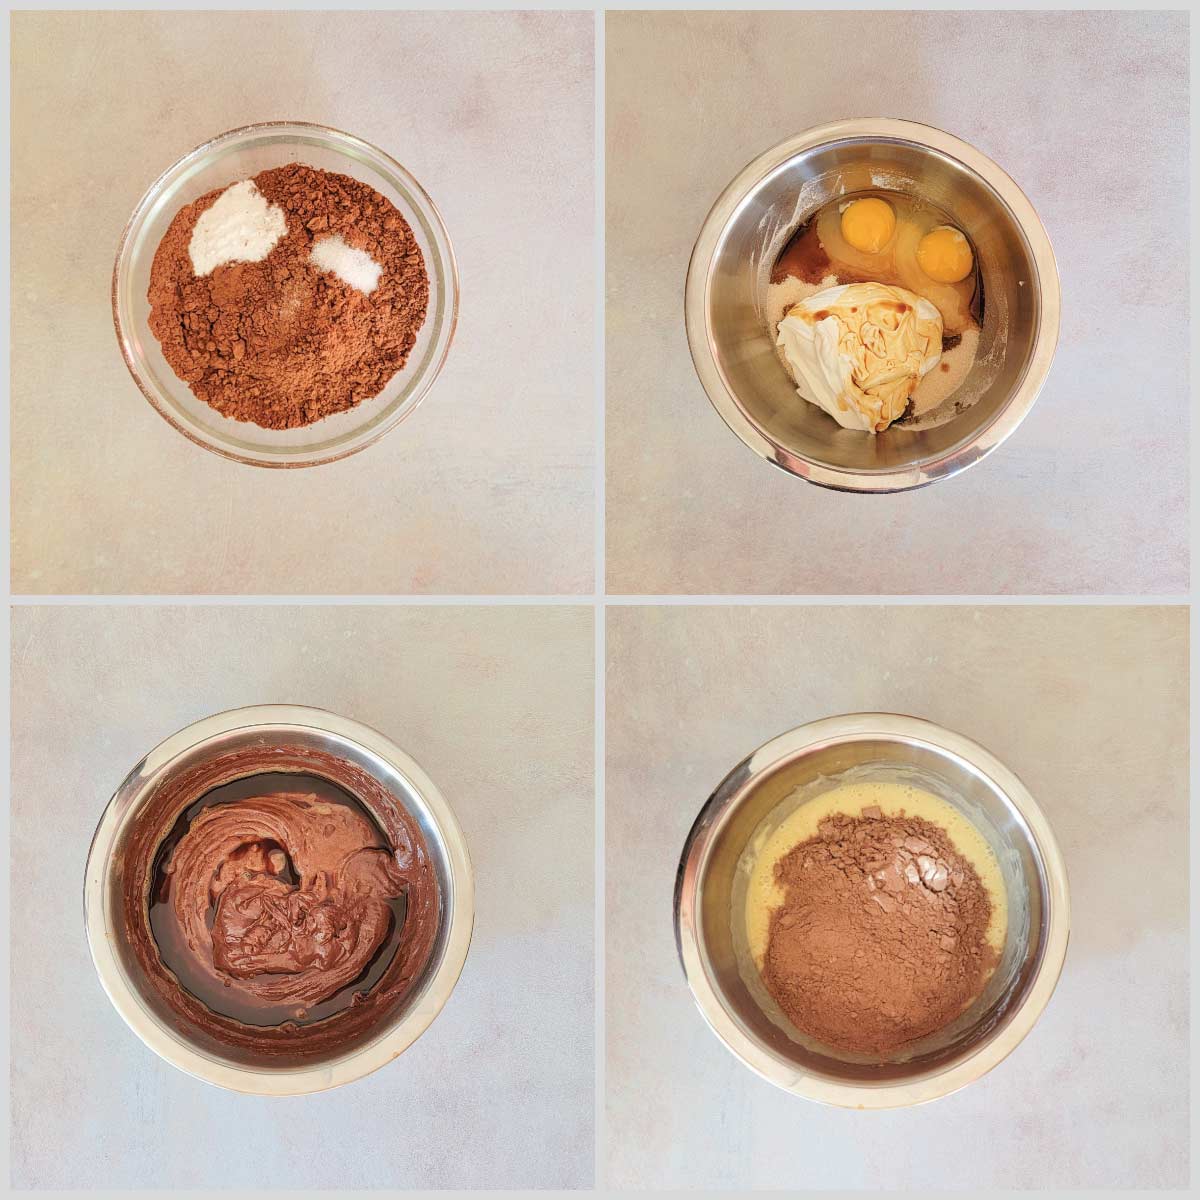 Step by step pictures for mixing batter - mixing dry ingredients, mixing wet ingredients, combining wet and dry, and adding the hot espresso.